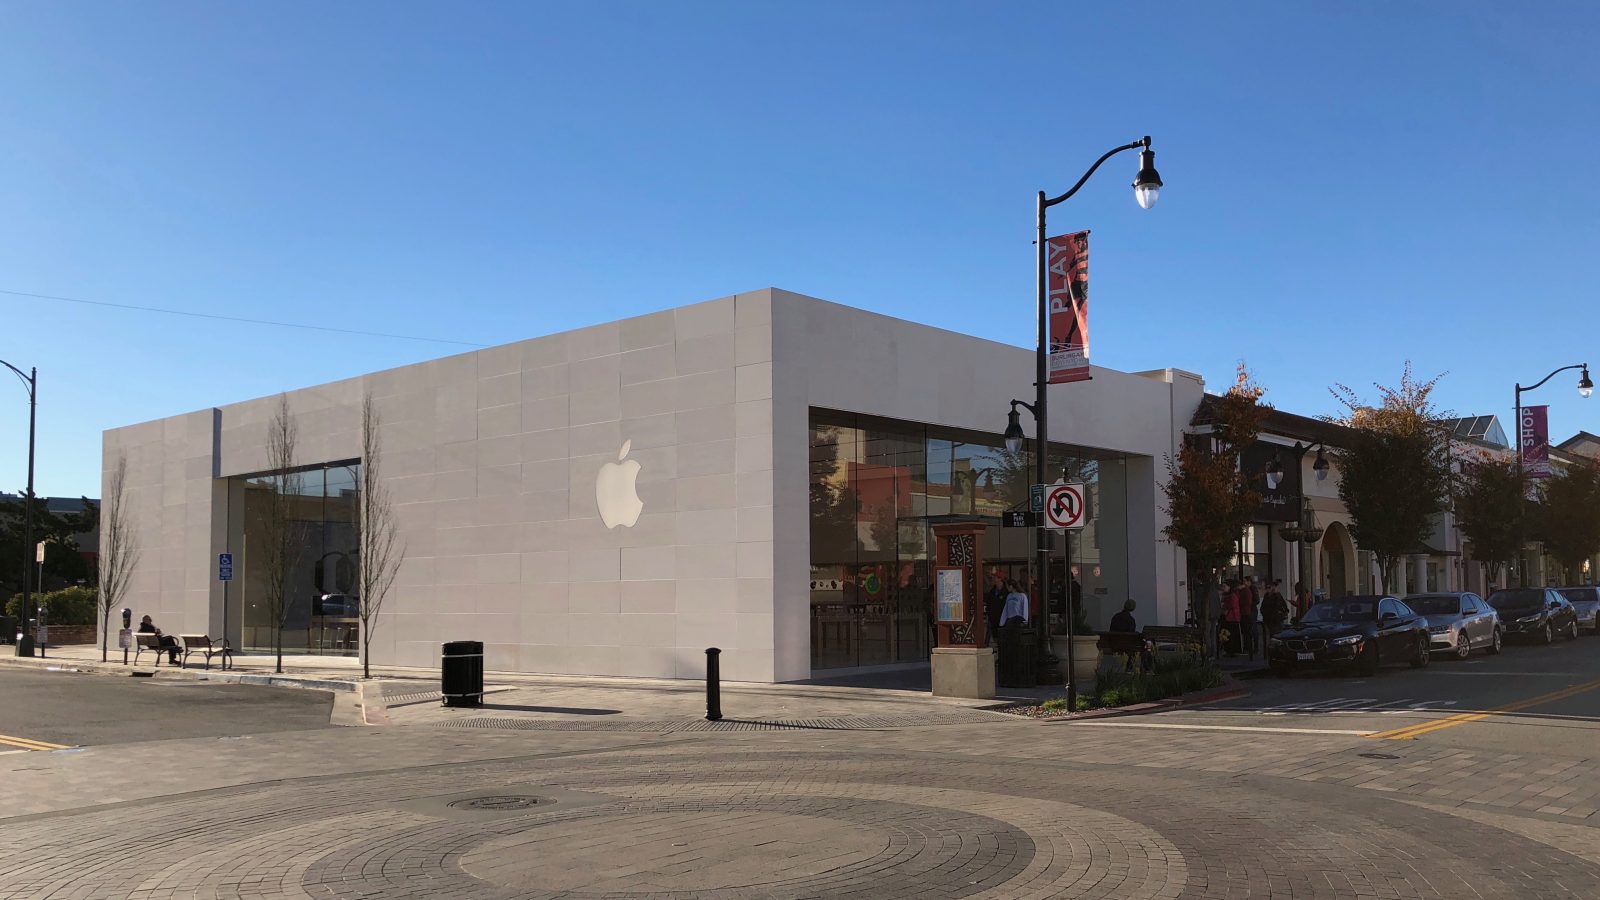 Thieves break into another Apple store in California; loss is $ 35,000